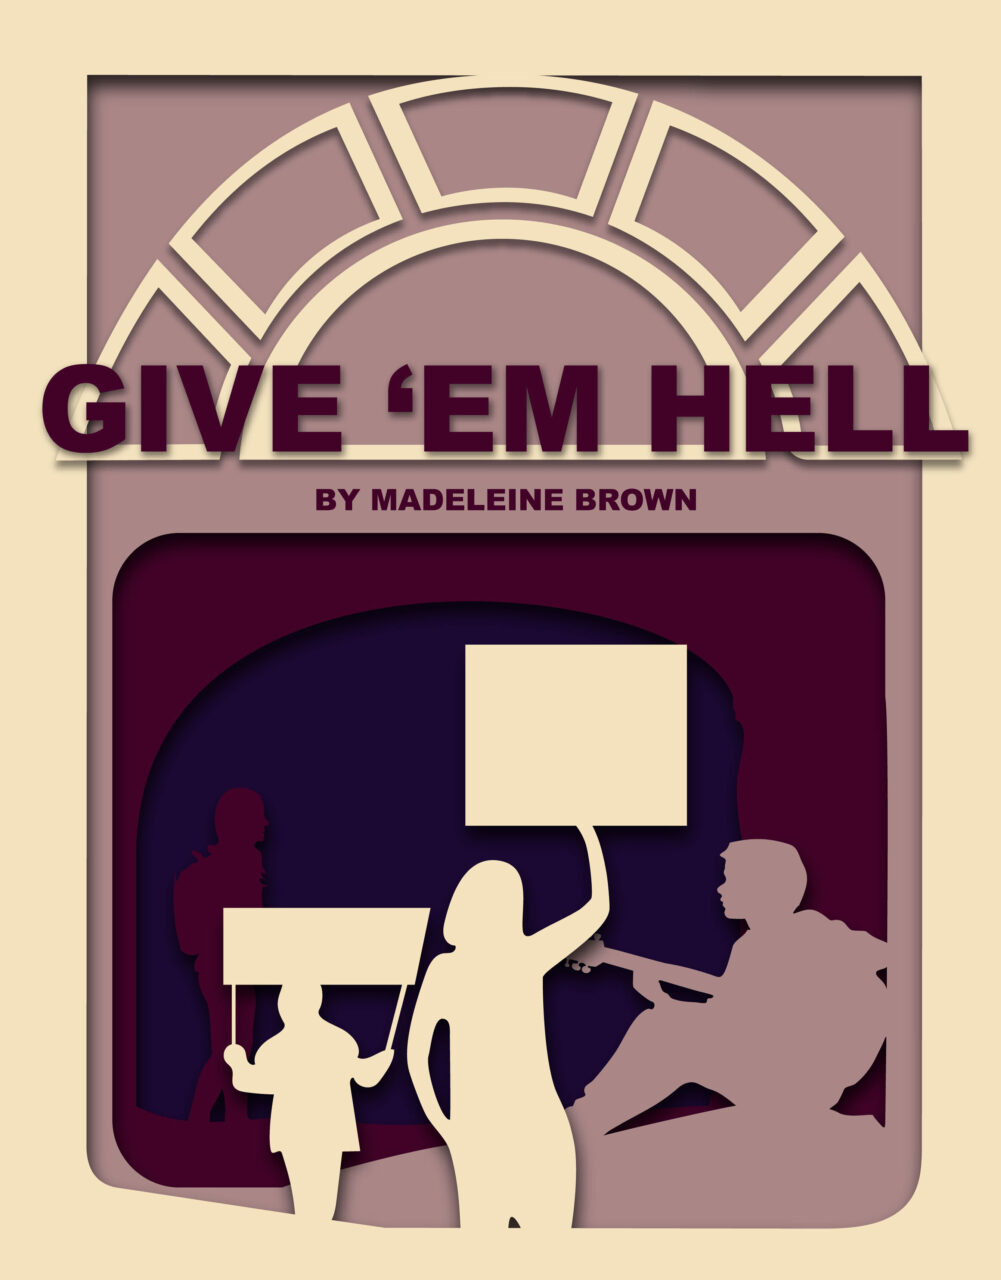 poster with two activists, a person playing guitar, and a student with the text "give 'em hell by madeleine brown"